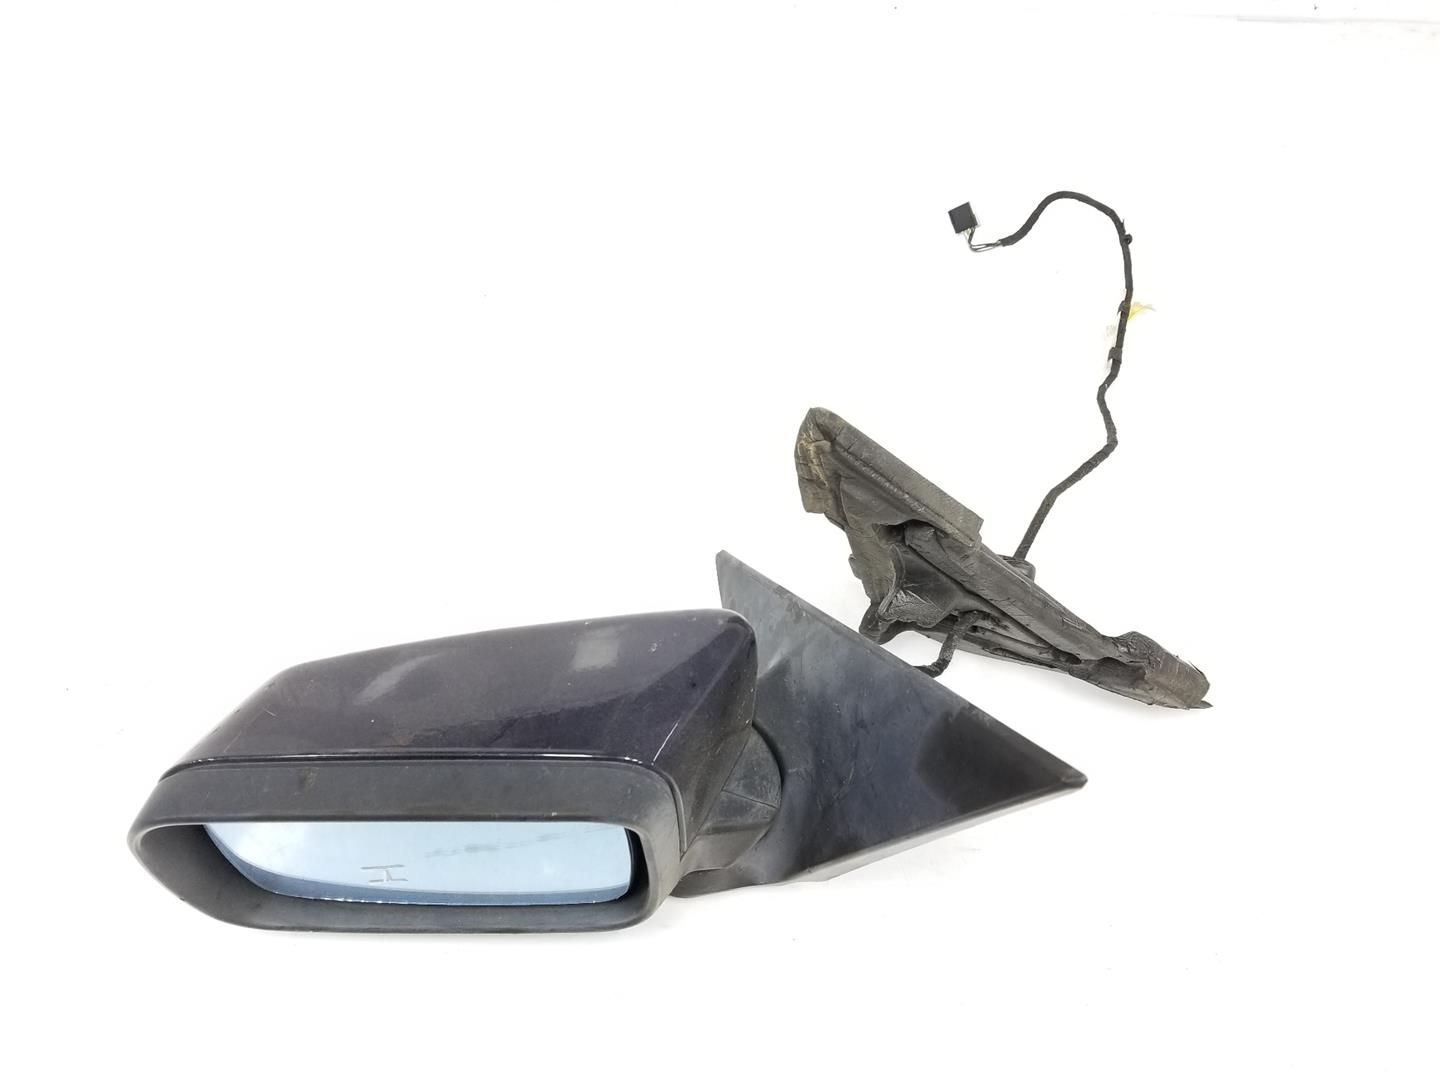 BMW 3 Series E46 (1997-2006) Left Side Wing Mirror 51168245125, 51168245125, AZUL317 19773151